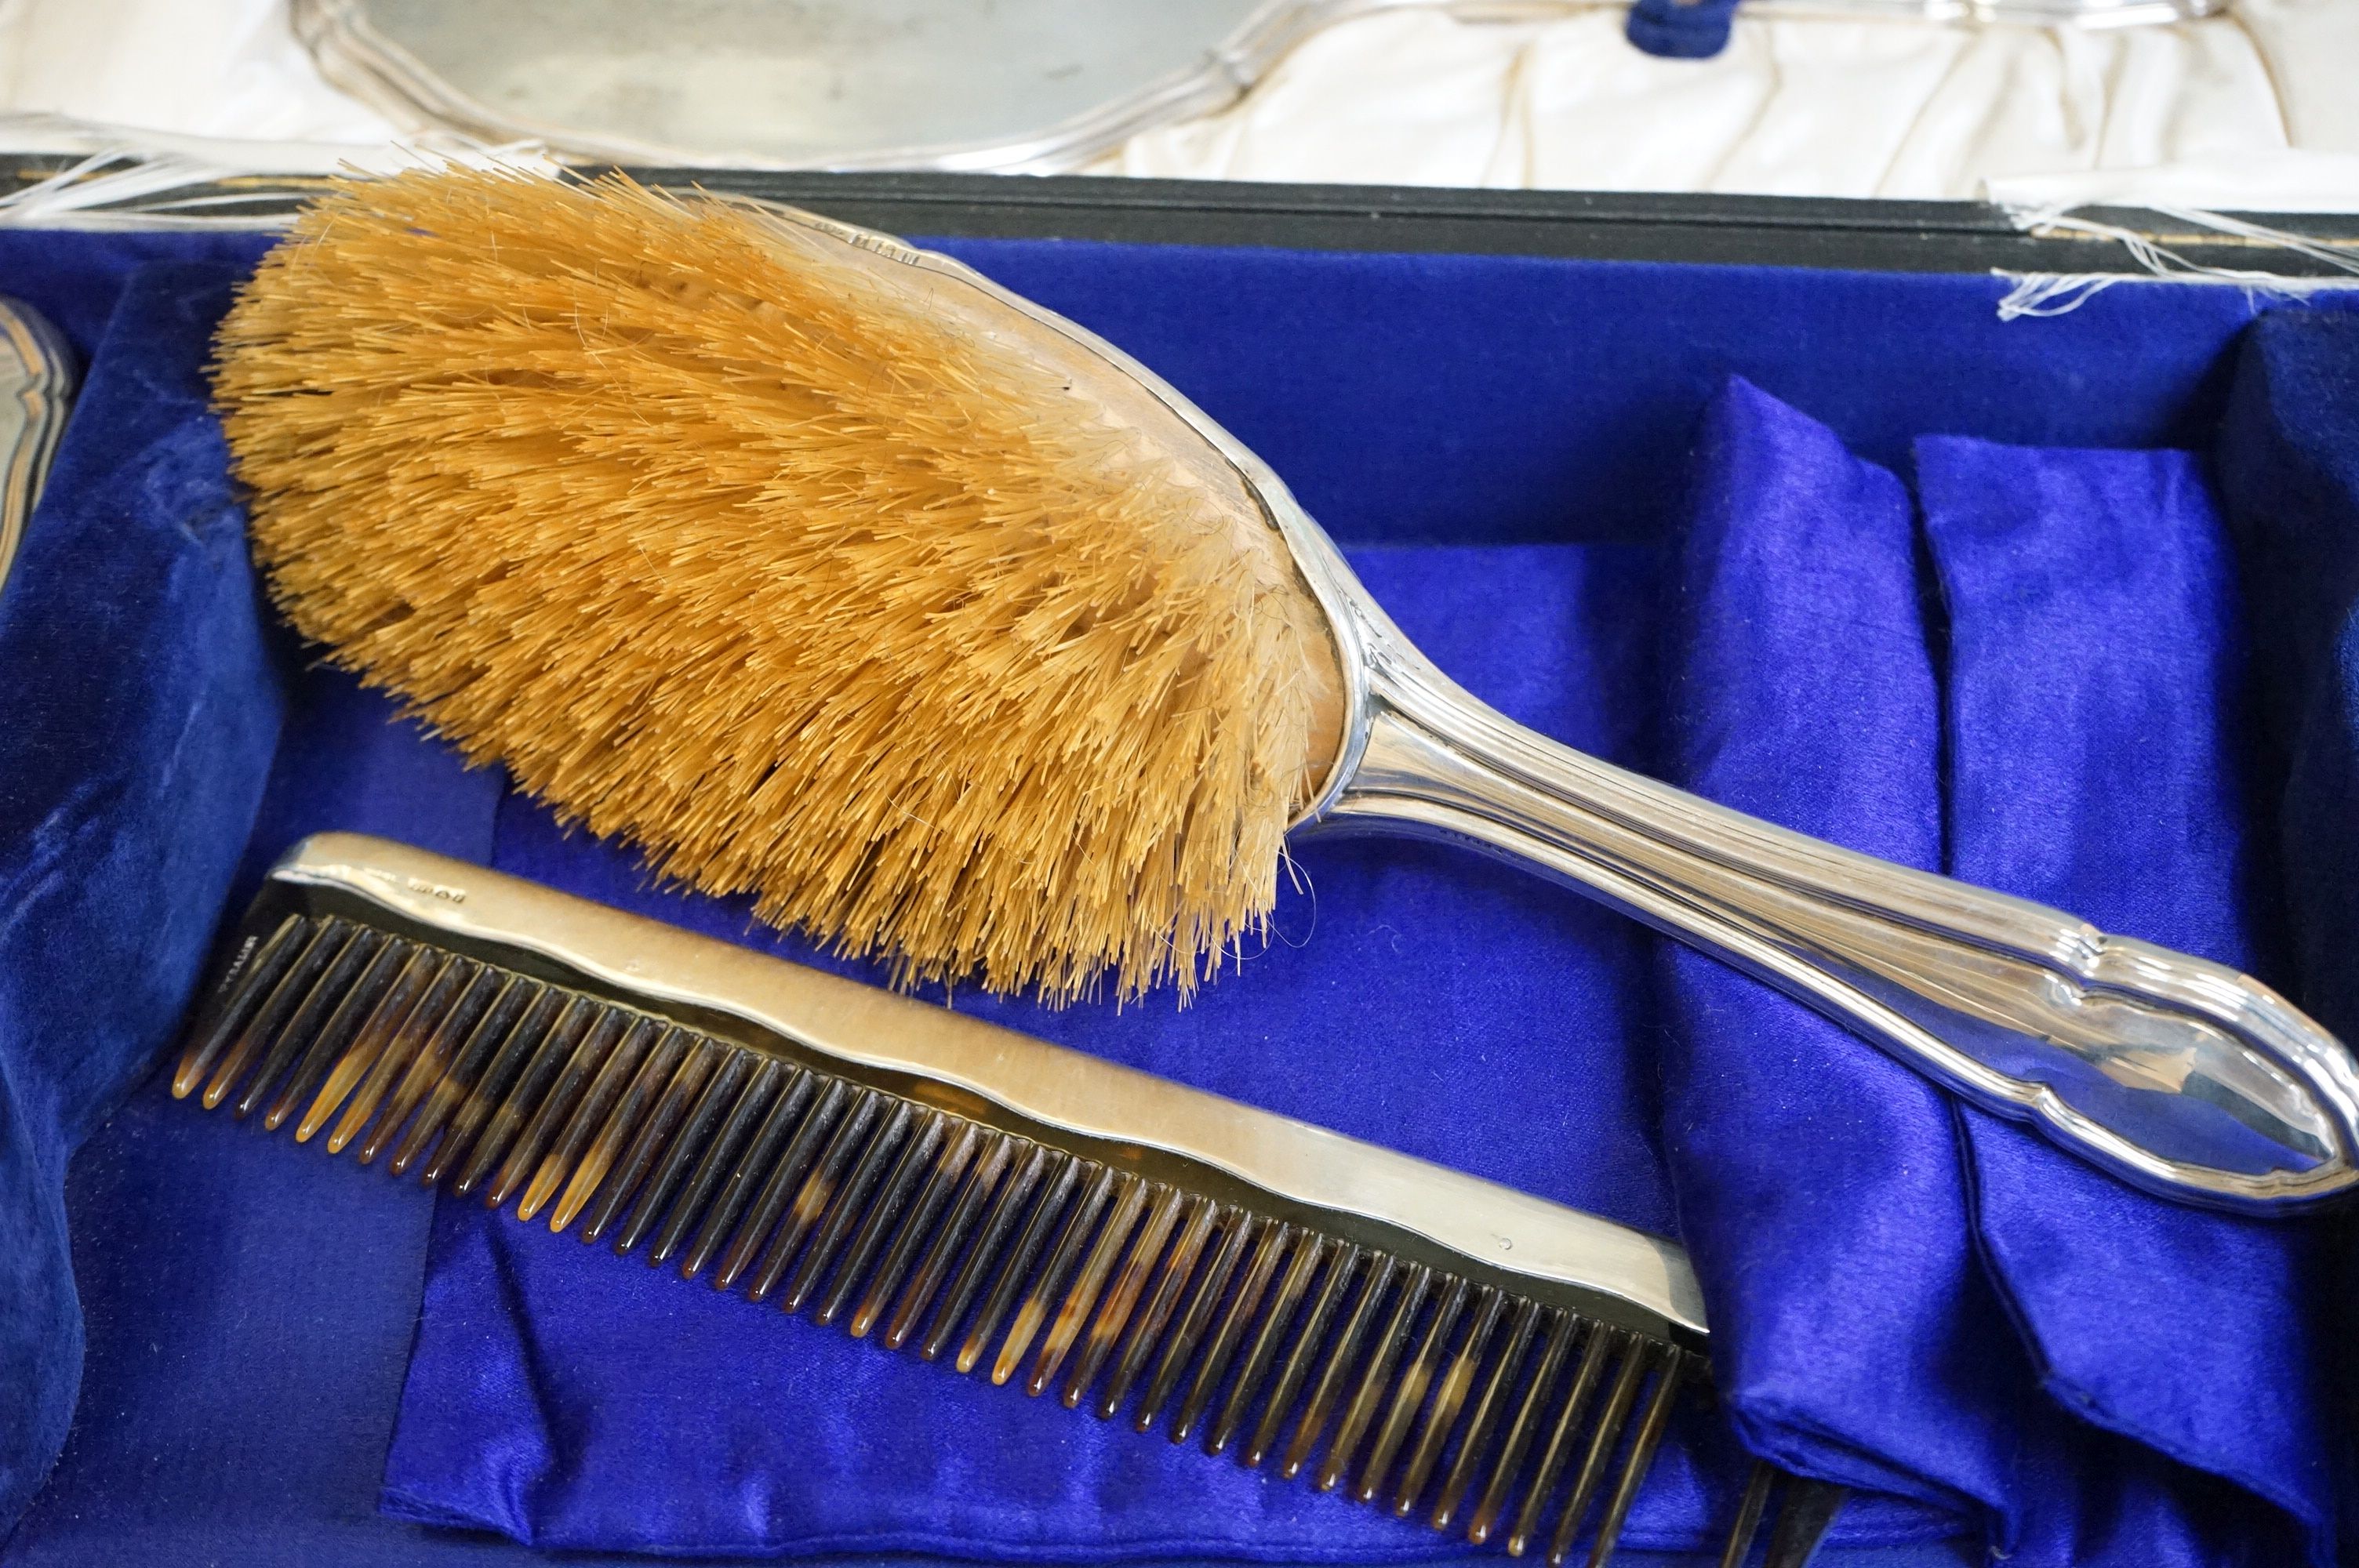 A Gorham Manufacturing Co sterling silver vanity brush & mirror set in original fitted box - Image 3 of 9